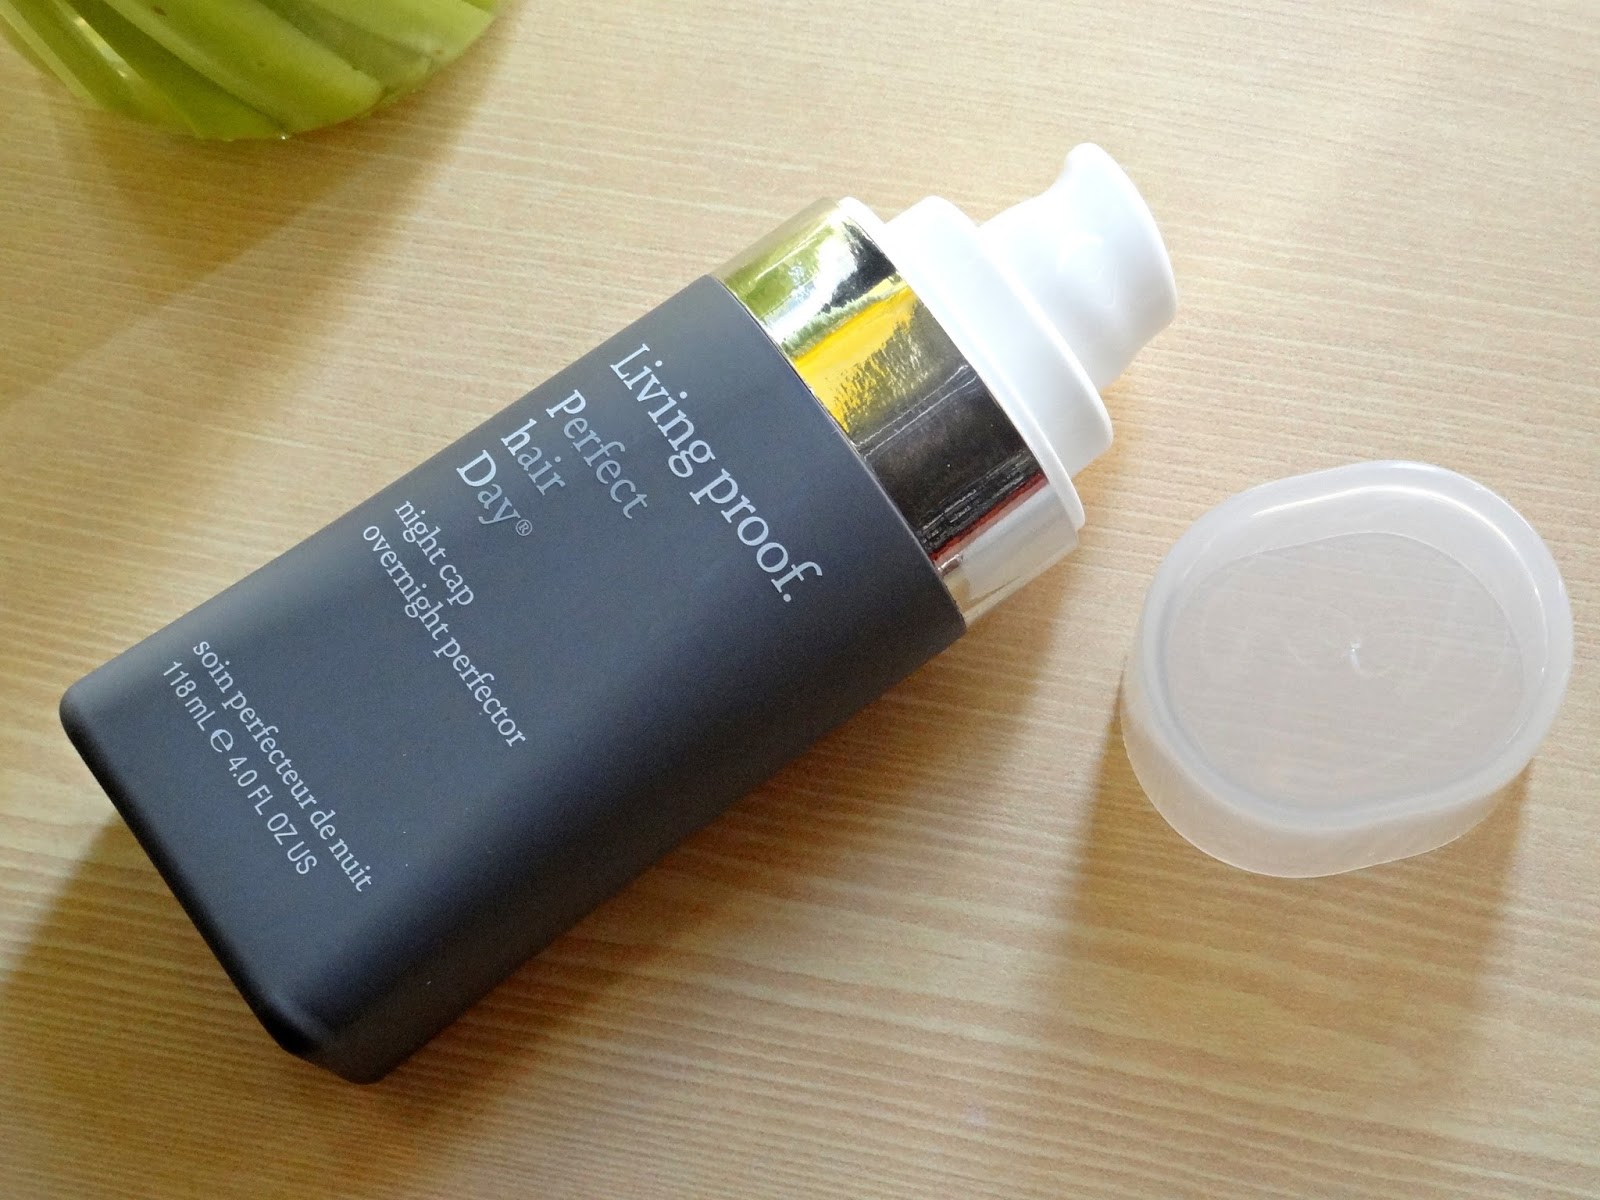 Living Proof Perfect Hair Day Night Cap Overnight Perfector Review, Photos